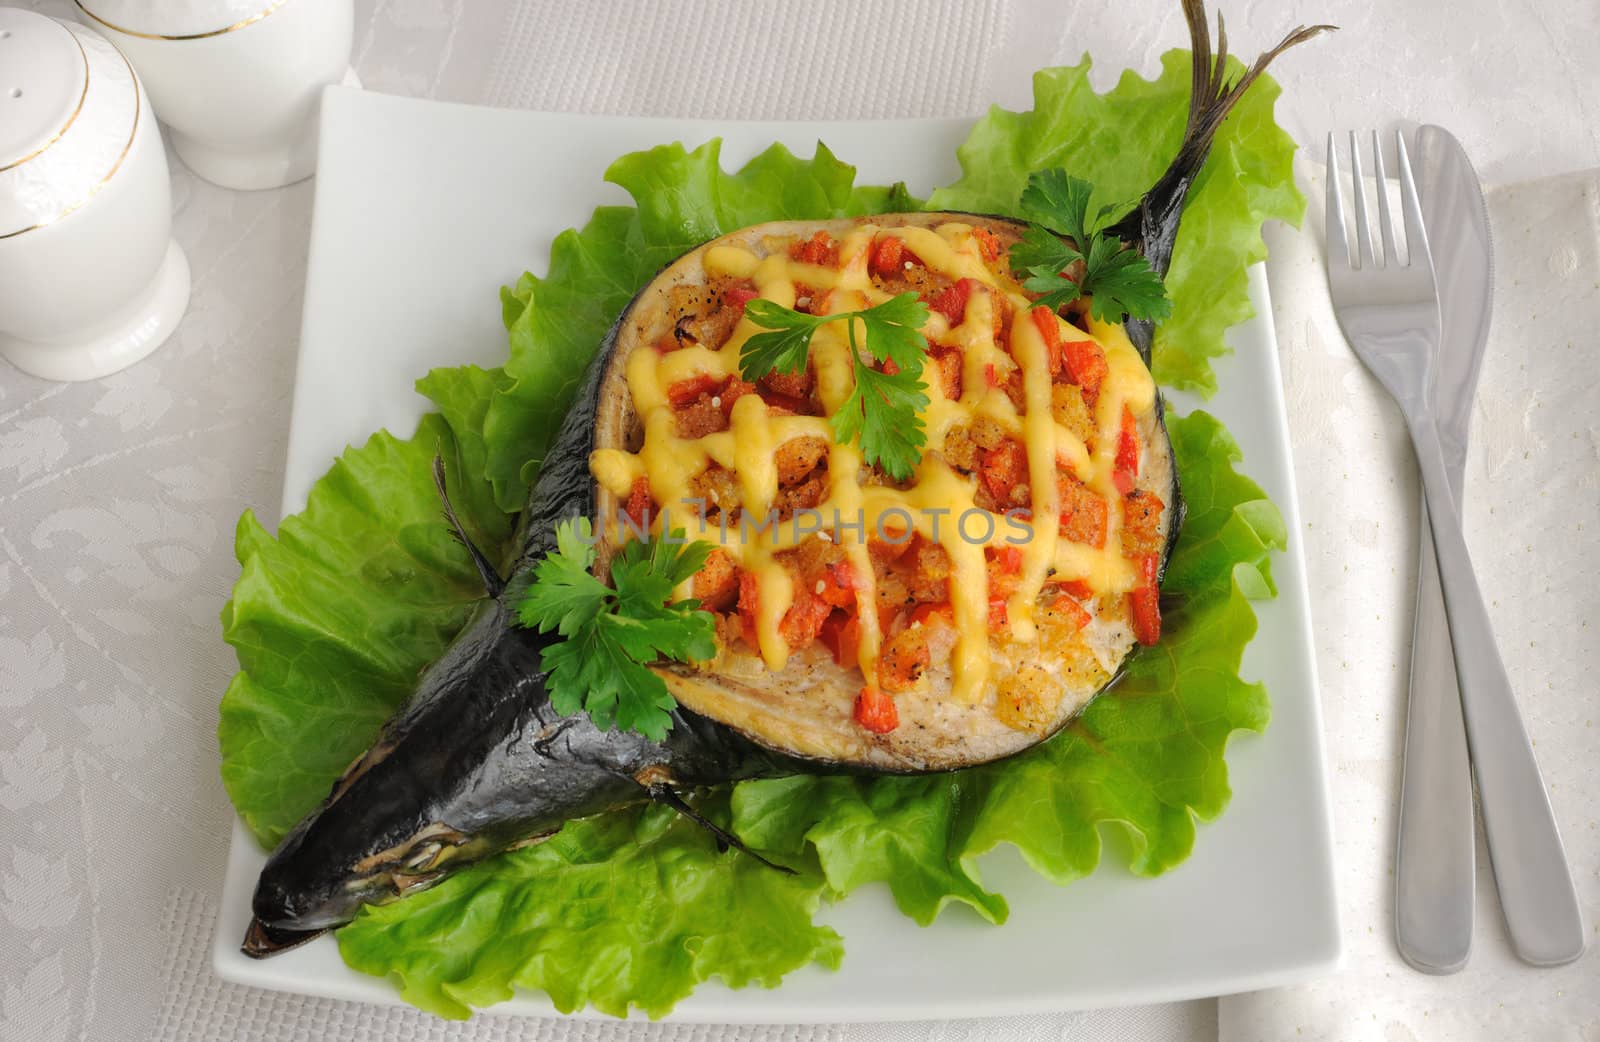 Mackerel stuffed with vegetables and cheese by Apolonia